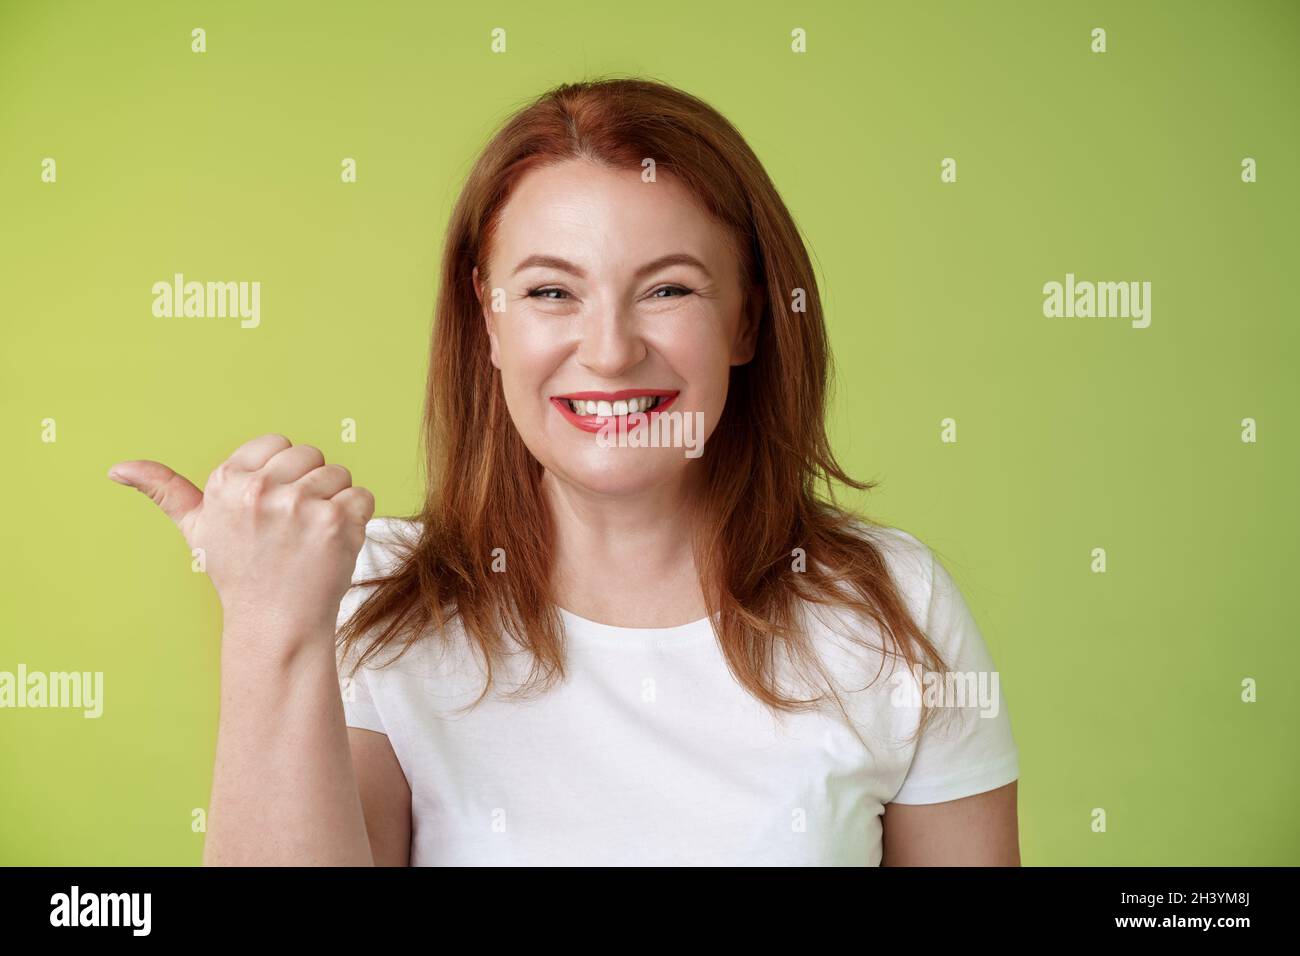 Come visit our store. Cheerful pleasant friendly charming redhead middle-aged woman entrepreneur inviting check-out promo smilin Stock Photo